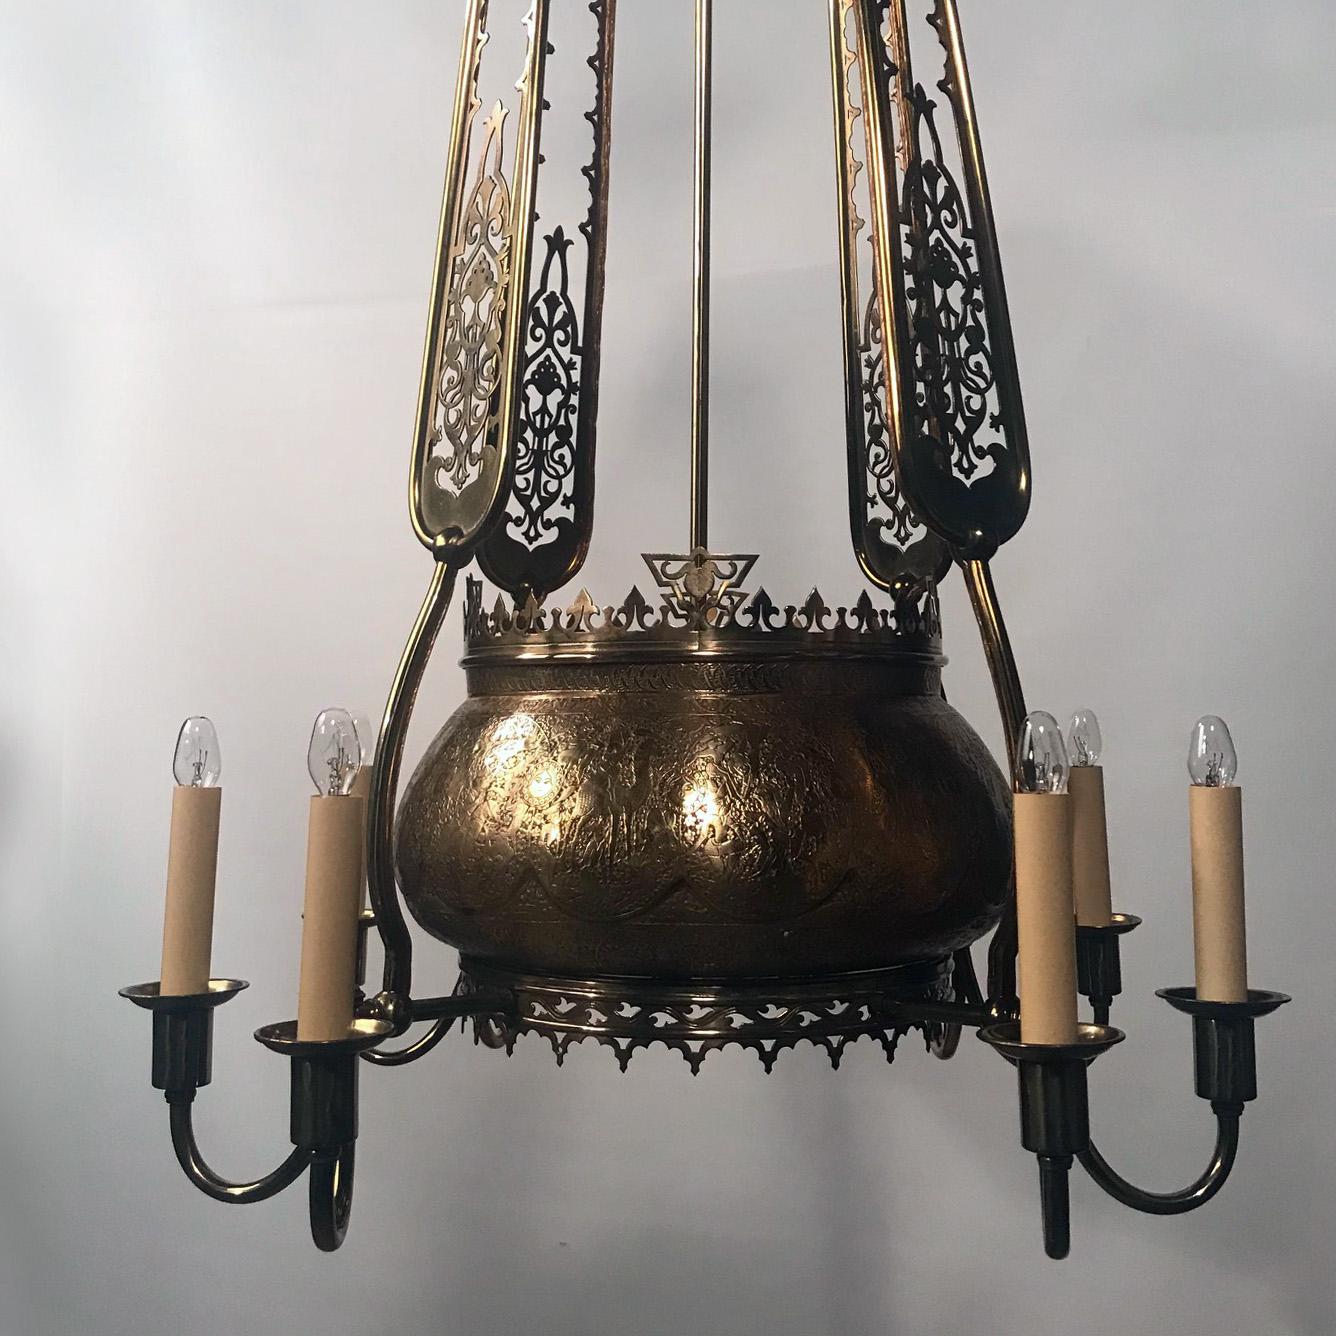 An antique Orientalist chandelier, the central Islamic brass bowl is finely
hand-engraved with scenes and forms the main focus of this late 19th century French chandelier which takes up the theme and adds the fretwork brass panels and various